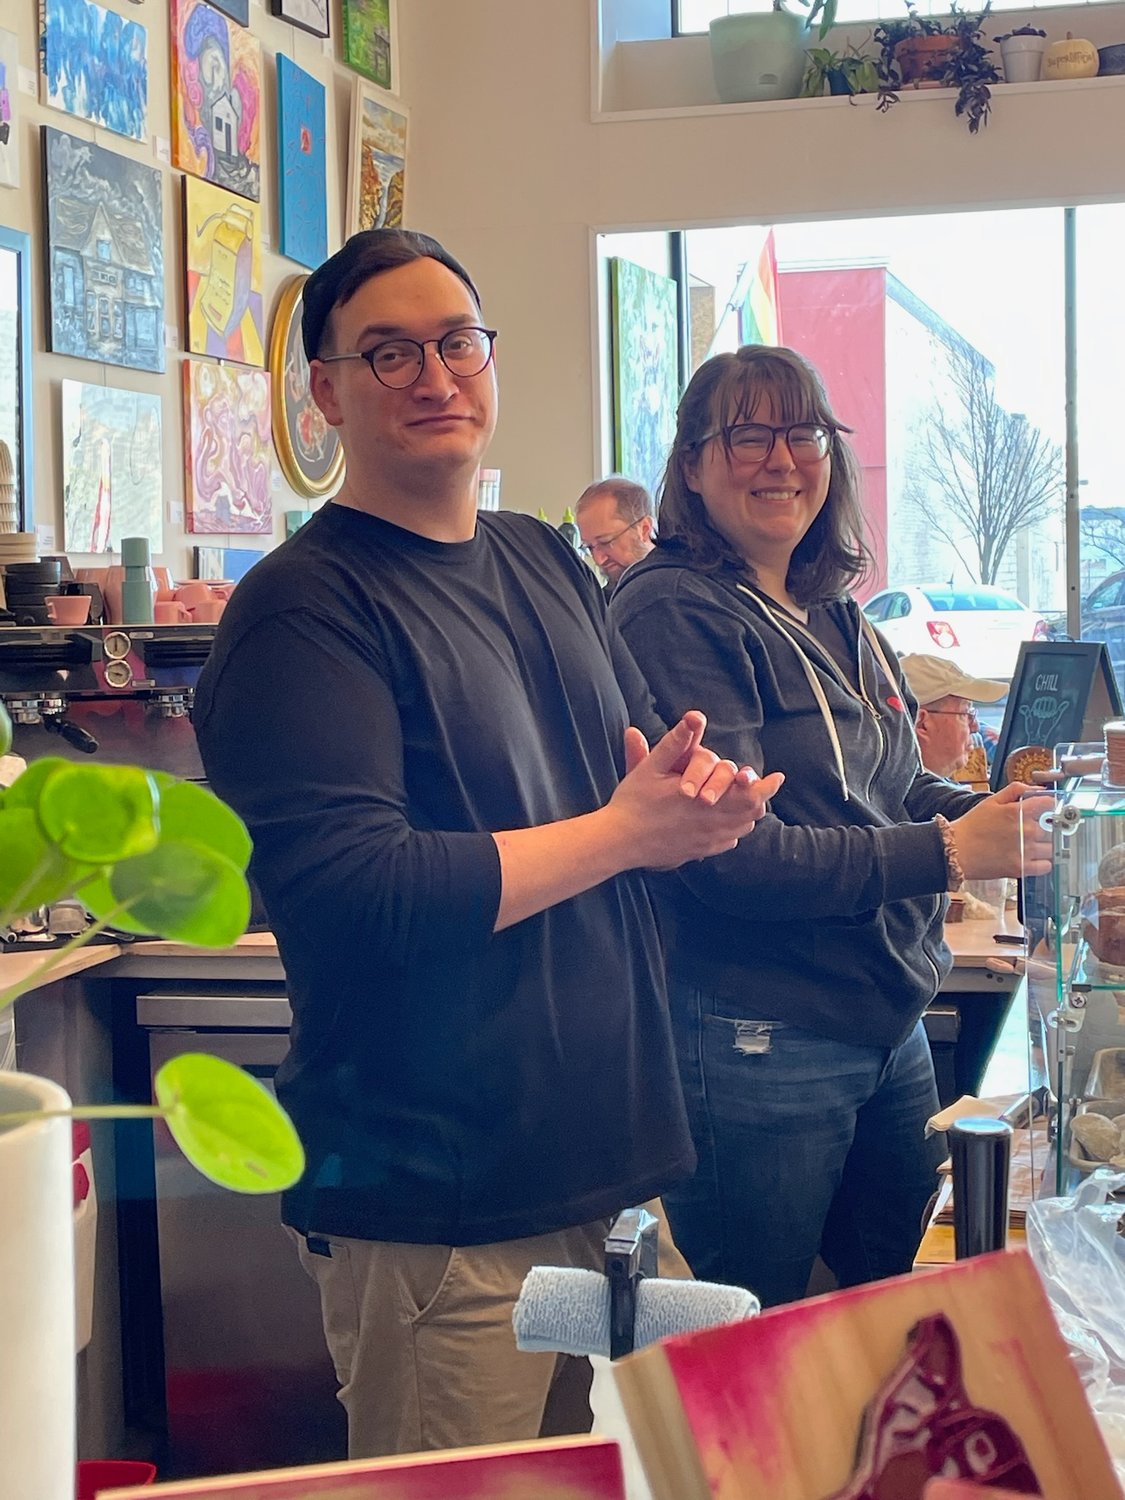 Happy to be busy on Small Business Saturday, husband-and-wife team Jonathon and Caitlin Matwijec-Walda take drink orders at their superofficial shop in downtown Rome.